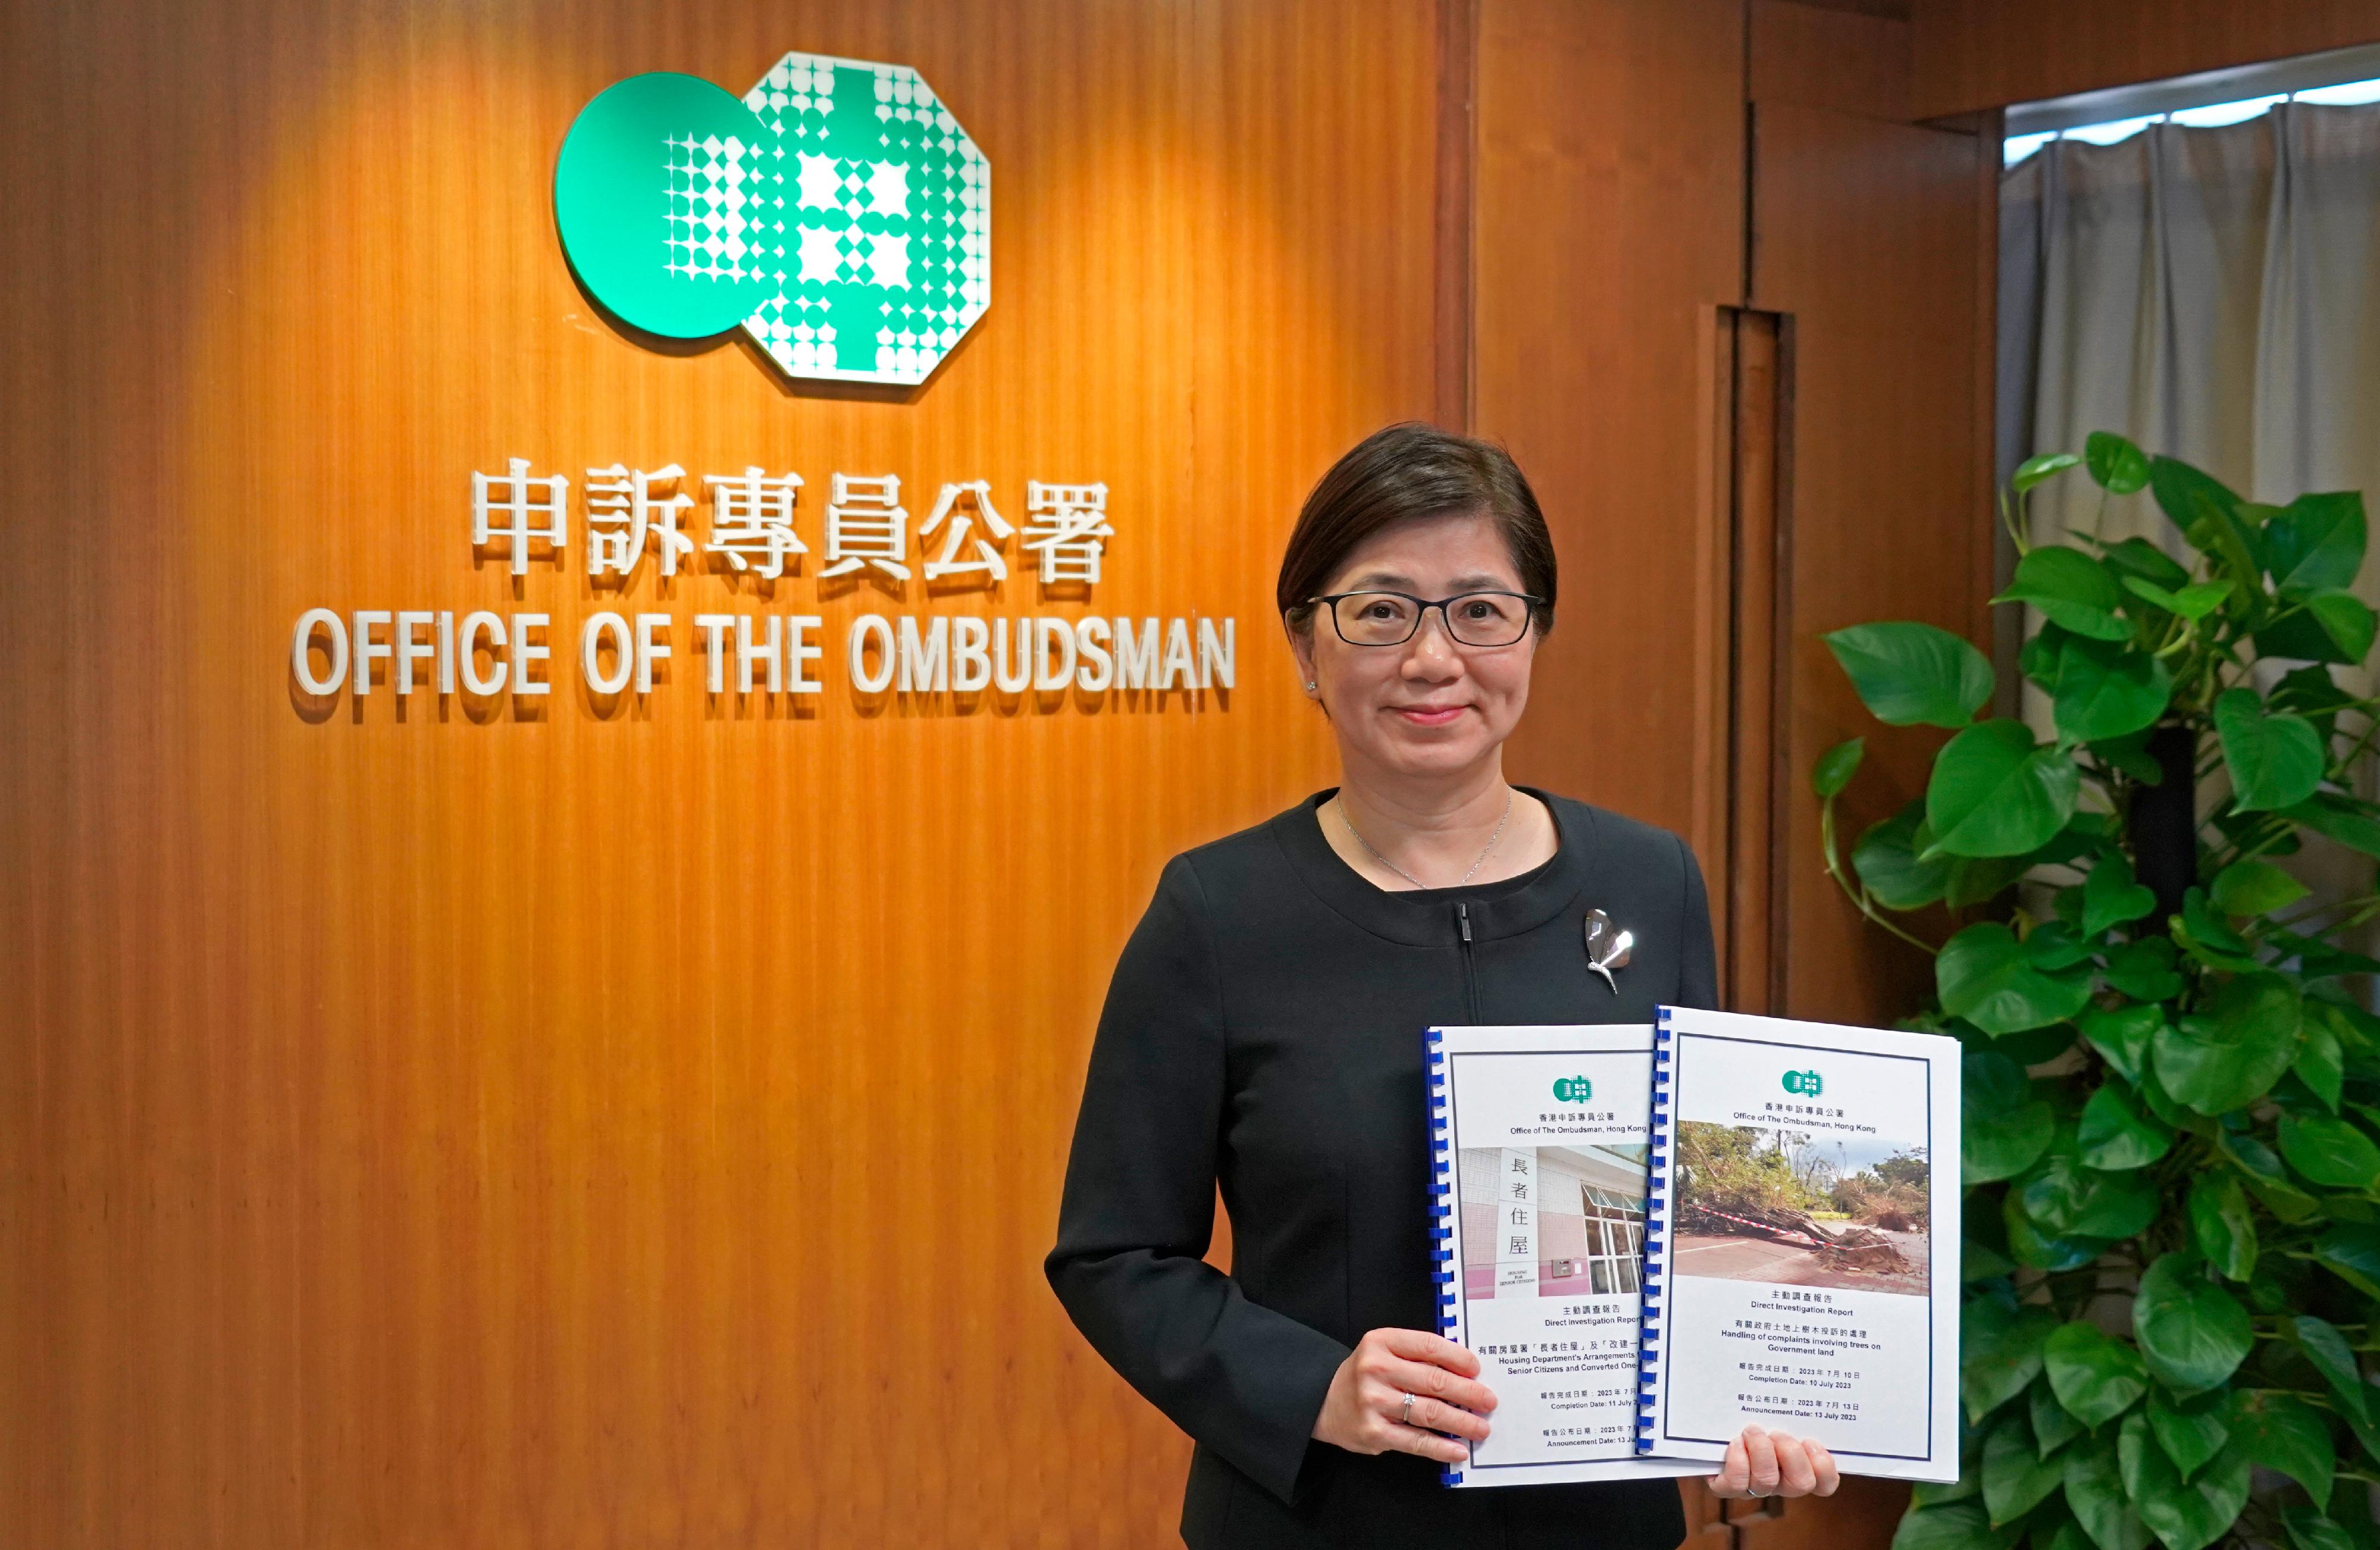 The Ombudsman, Ms Winnie Chiu, holds a press conference today (July 13) to announce the results of two direct investigations into the handling of complaints involving trees on government land and Housing Department's arrangements for Housing for Senior Citizens and converted one-person units.